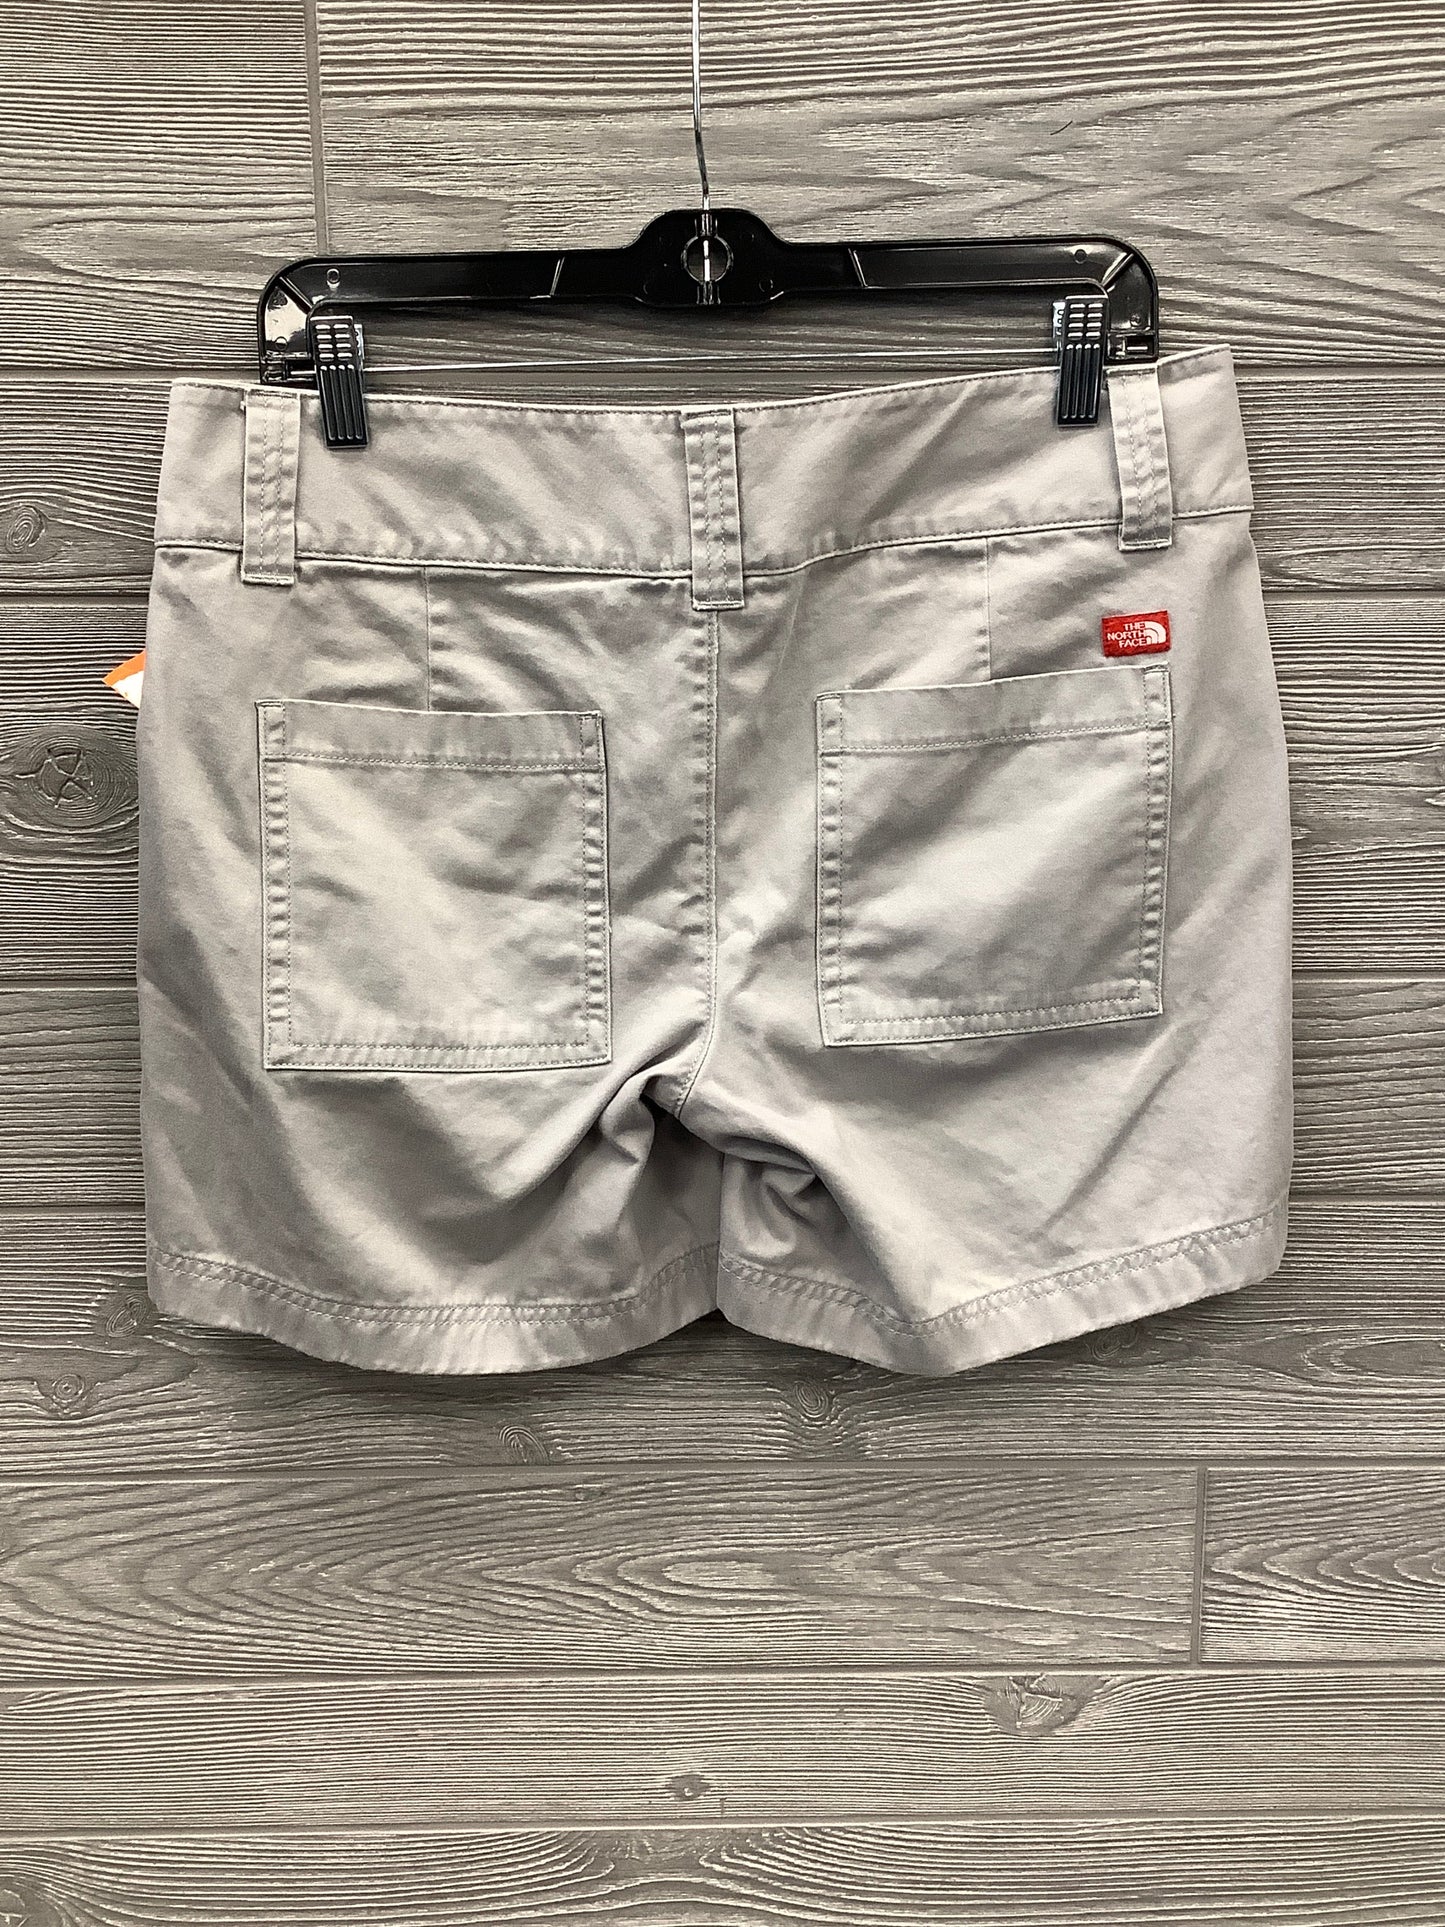 Shorts By The North Face  Size: 10